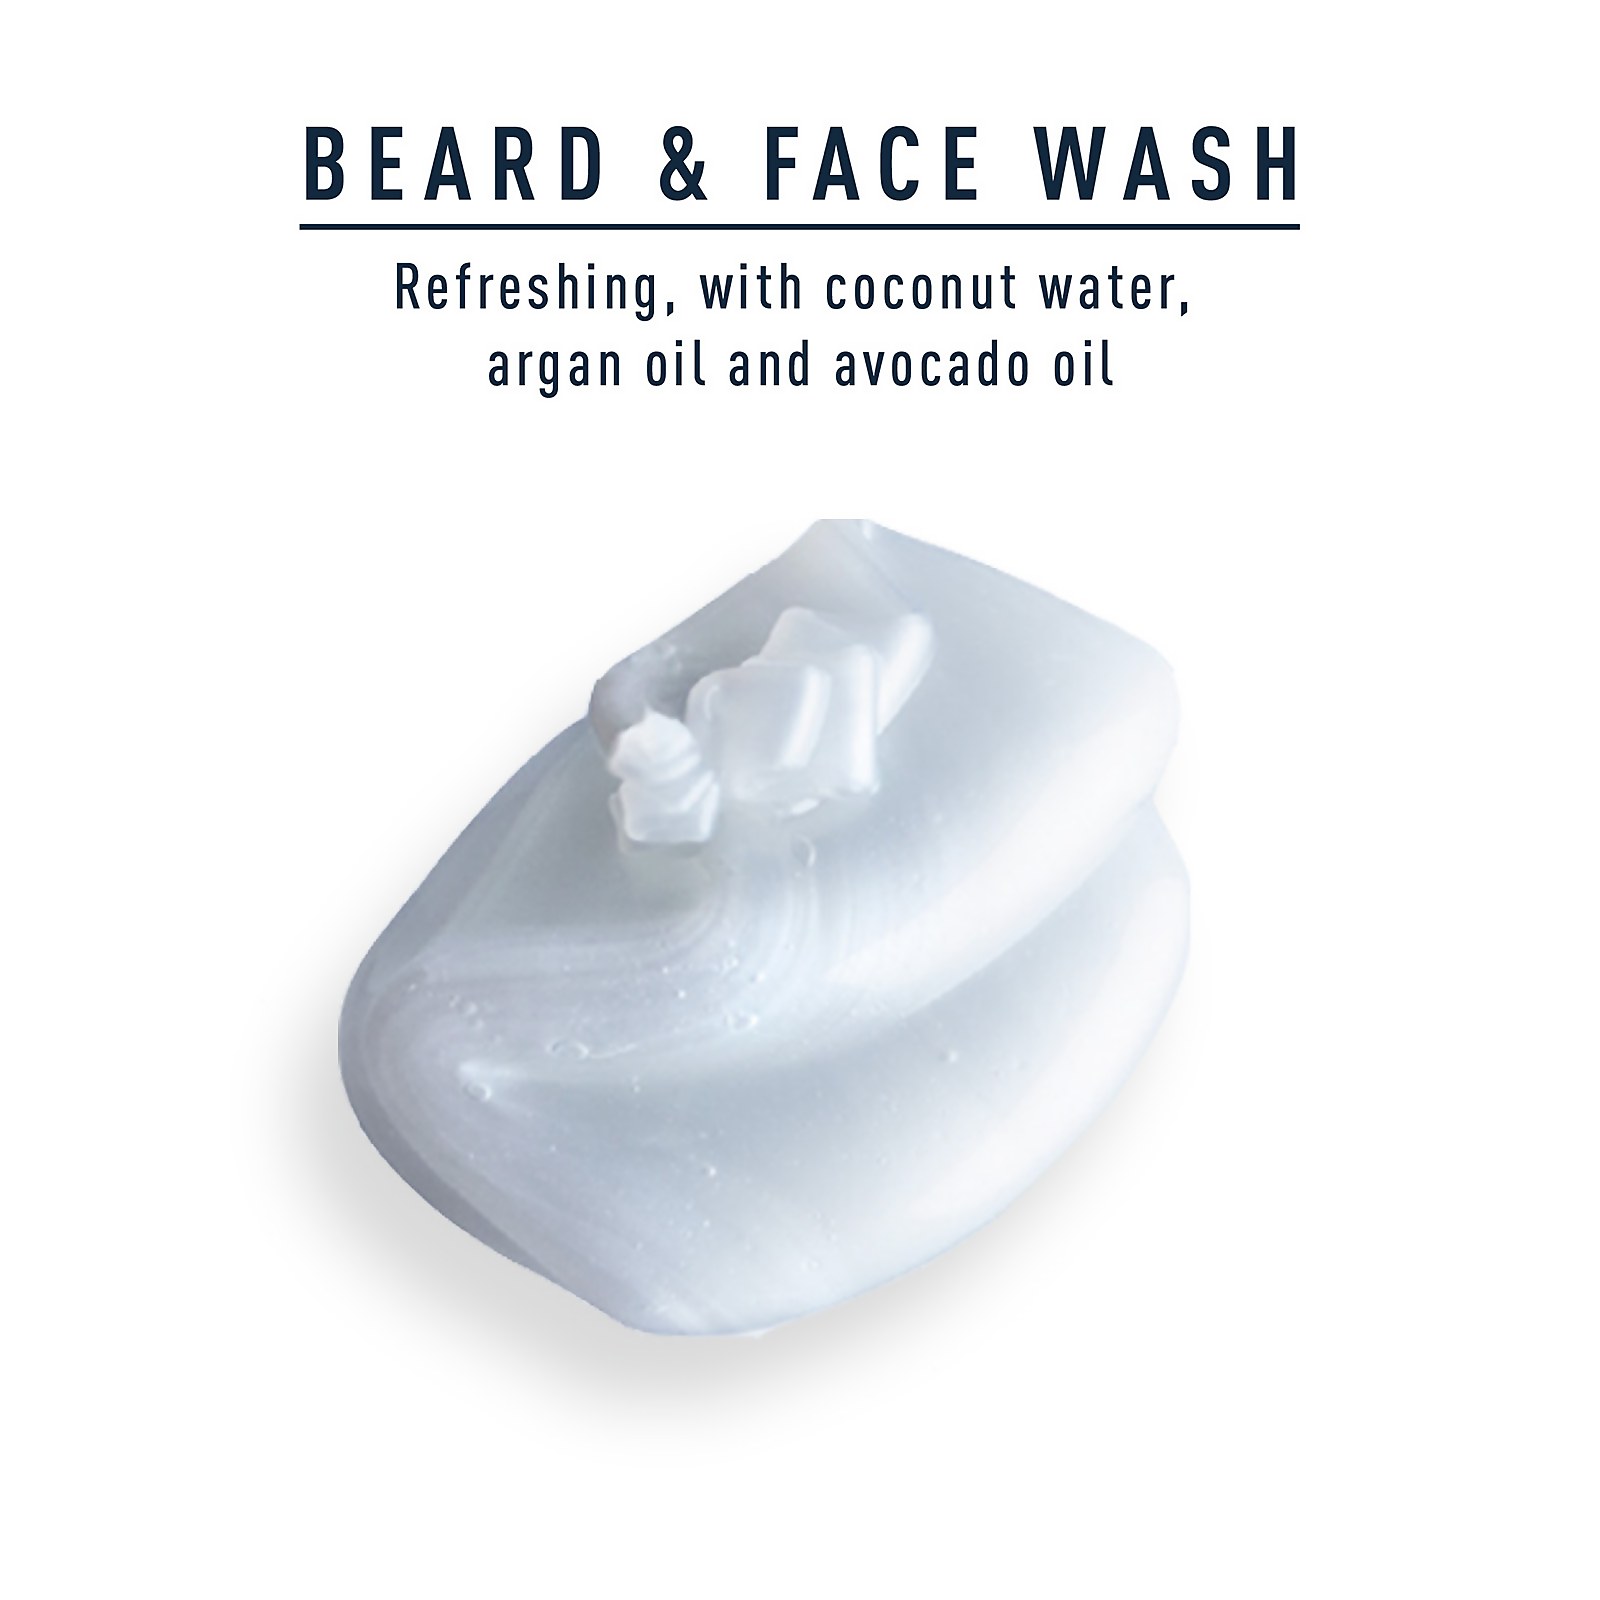 BEARD & FACE WASH Refreshing, with coconut water,
                                  argan oil and avocado oil
                                  